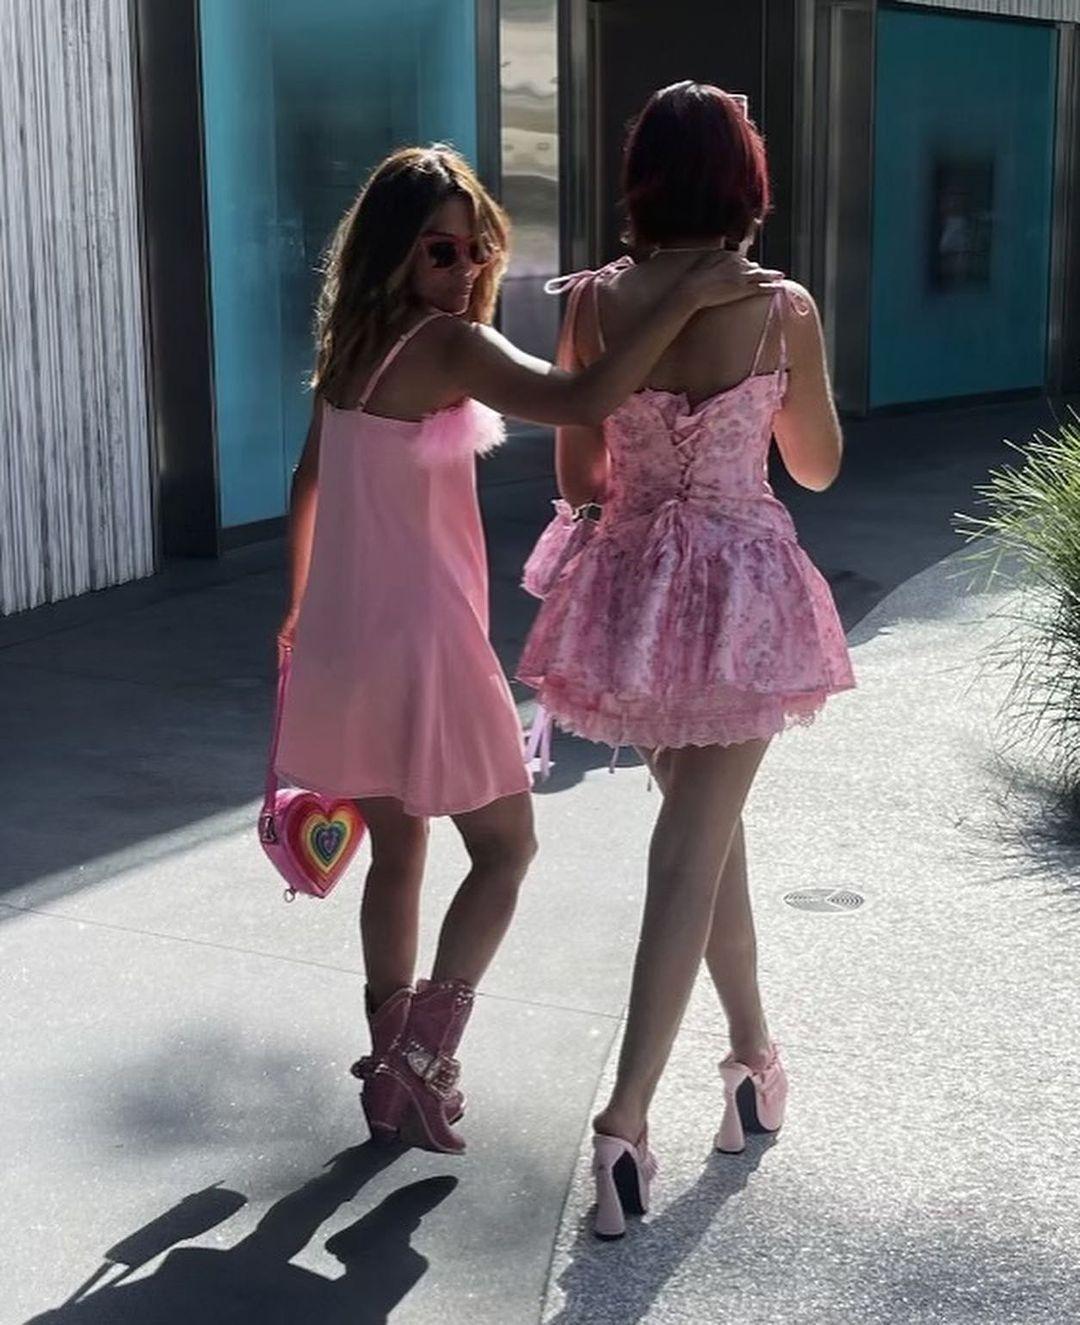 Fans Shocked At How Tall Halle Berry's 15-Year-Old Daughter Is In Rare Snap